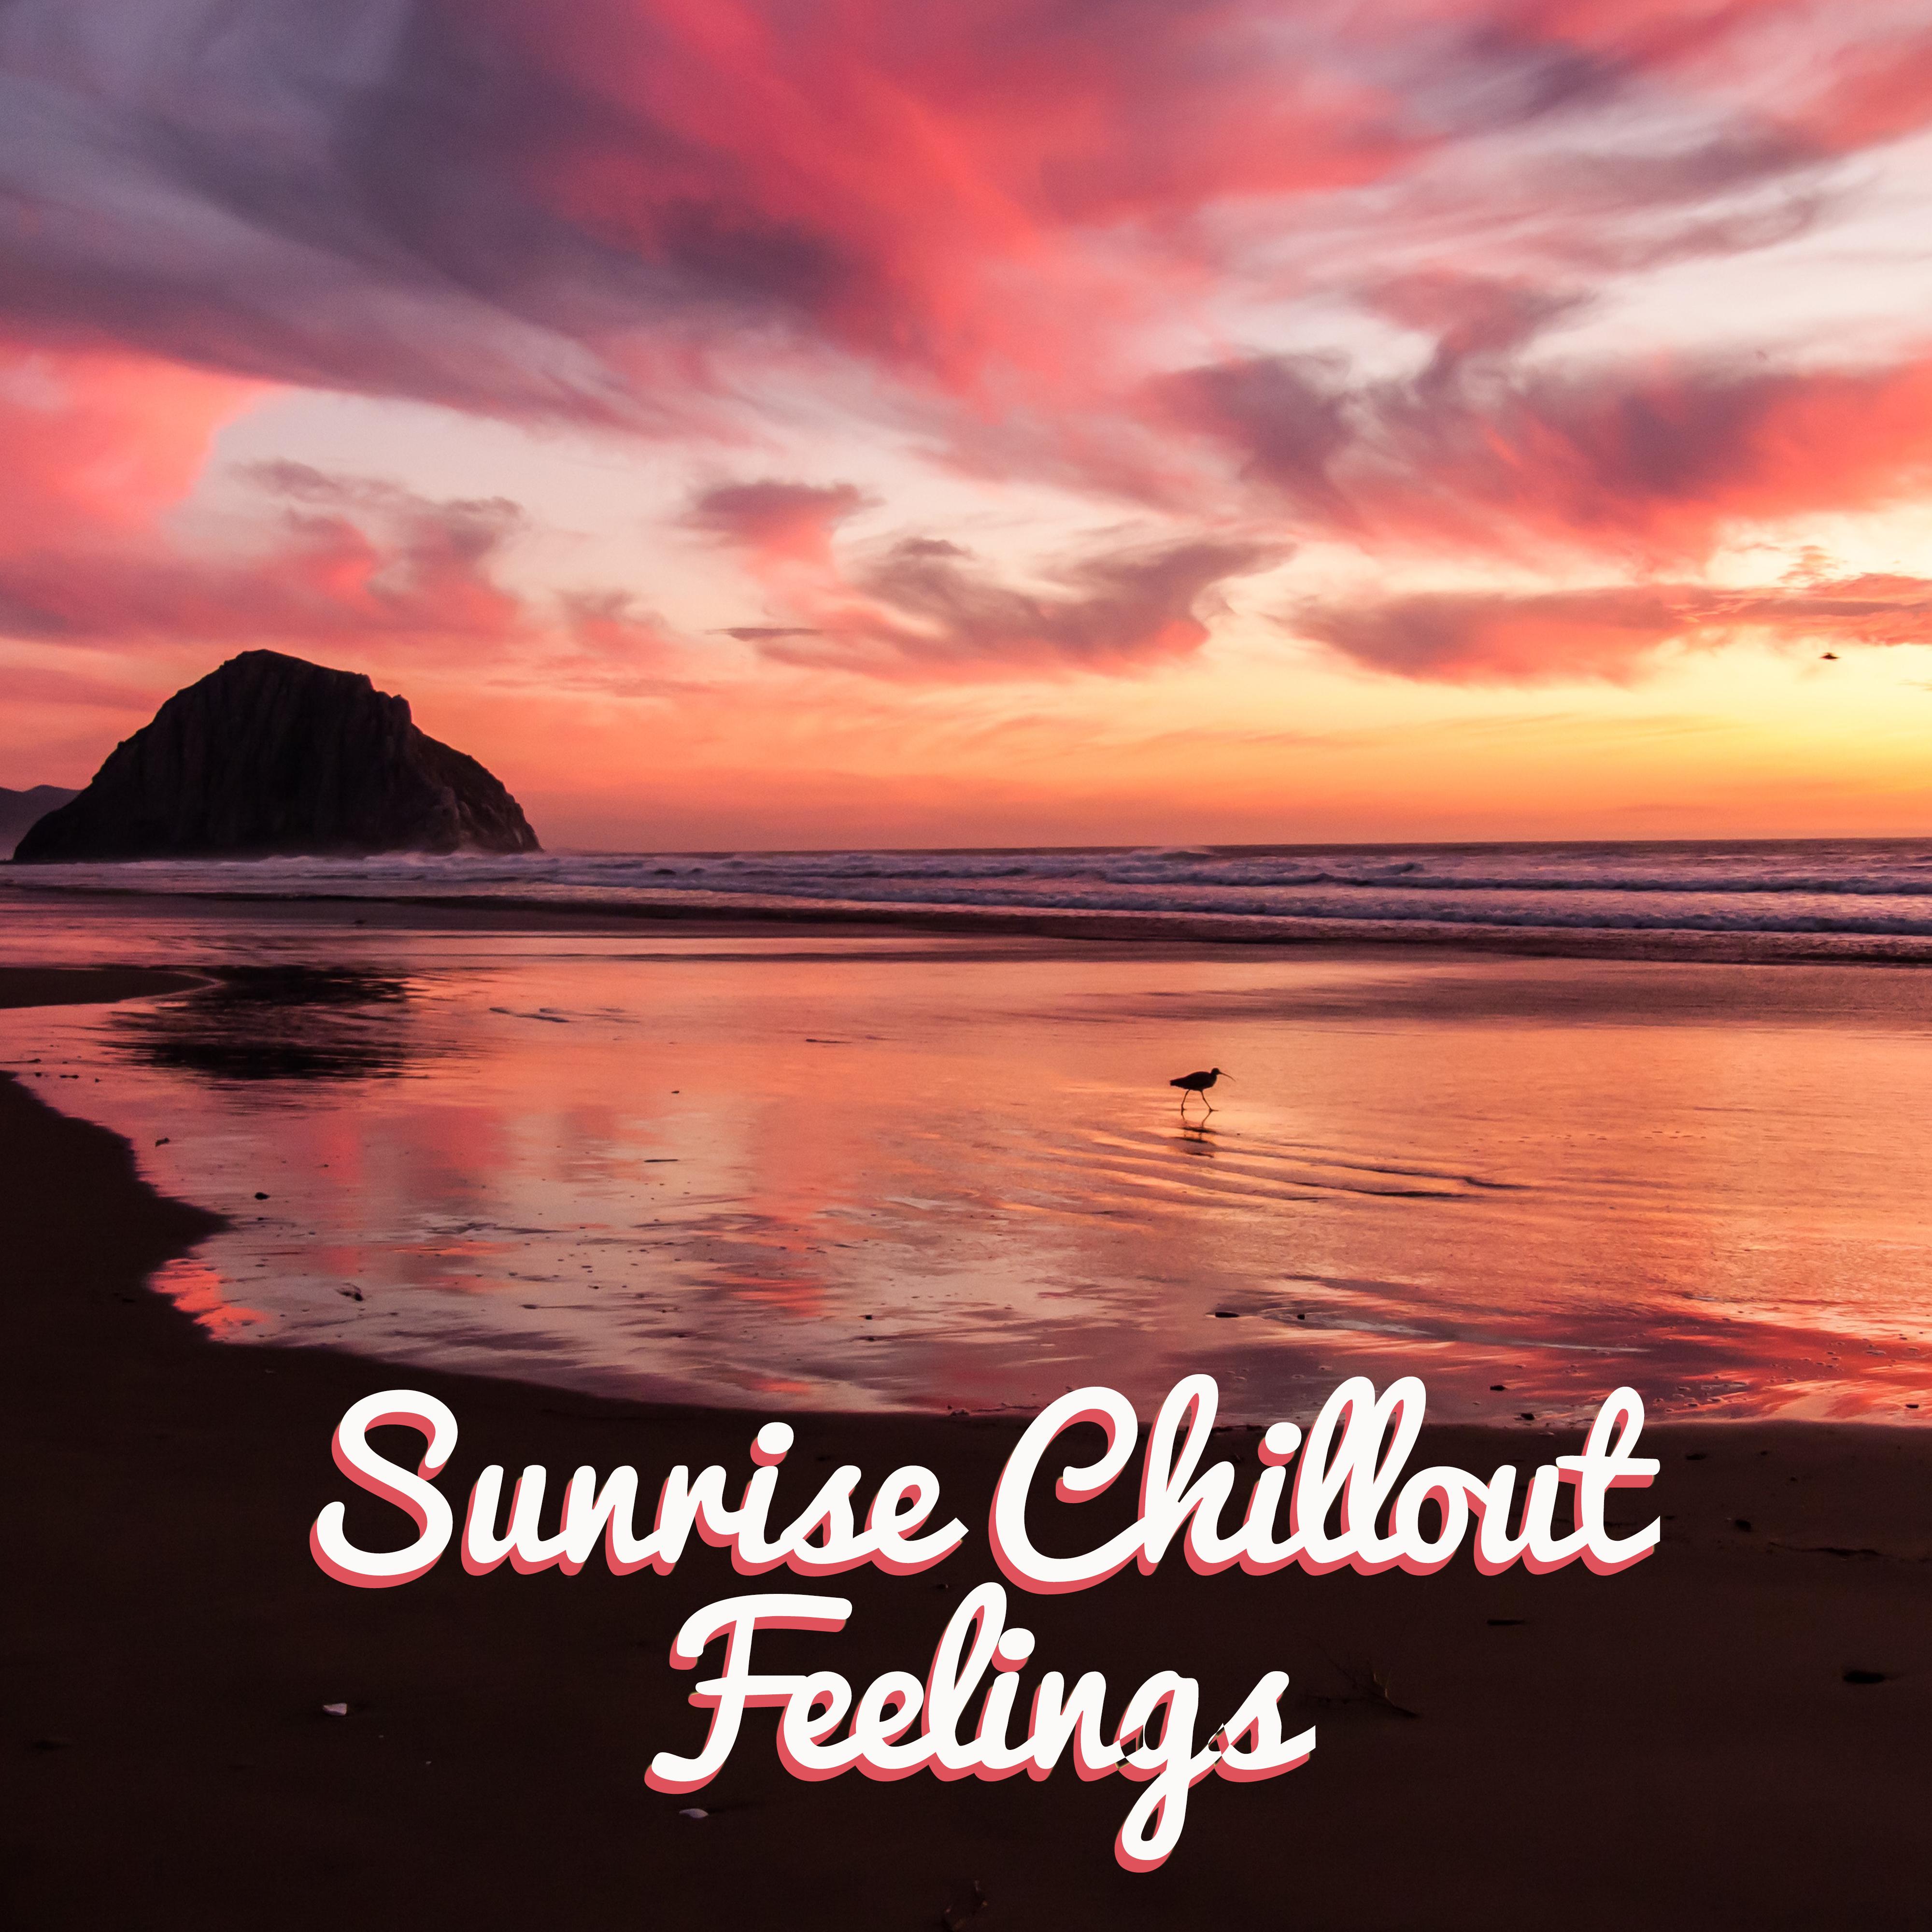 Sunrise Chillout Feelings: 15 Best Chill Out Relaxing Vibes for Beach Time Spending, Tropical Party Music, **** Vibes